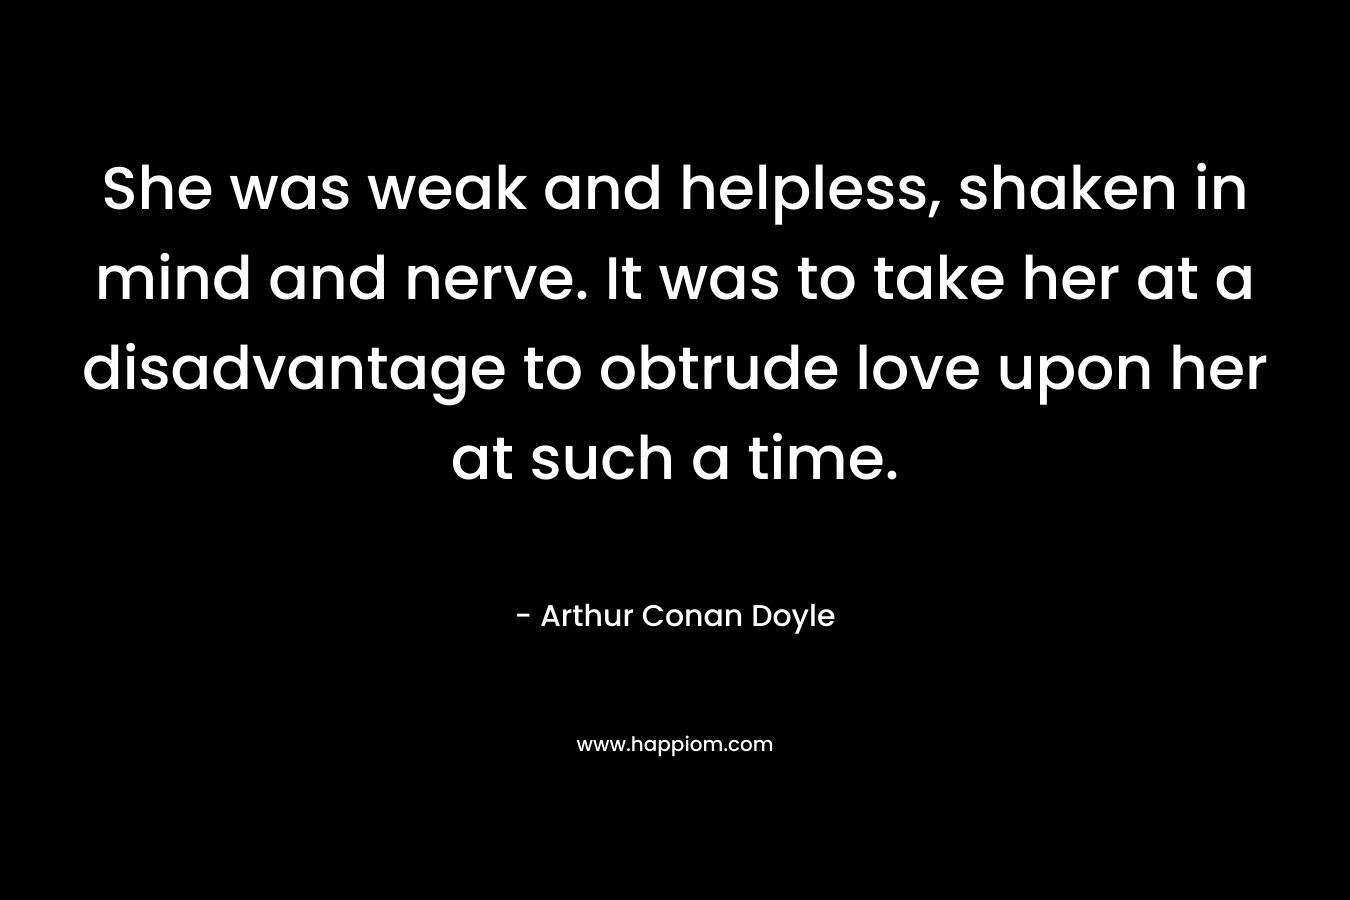 She was weak and helpless, shaken in mind and nerve. It was to take her at a disadvantage to obtrude love upon her at such a time. – Arthur Conan Doyle